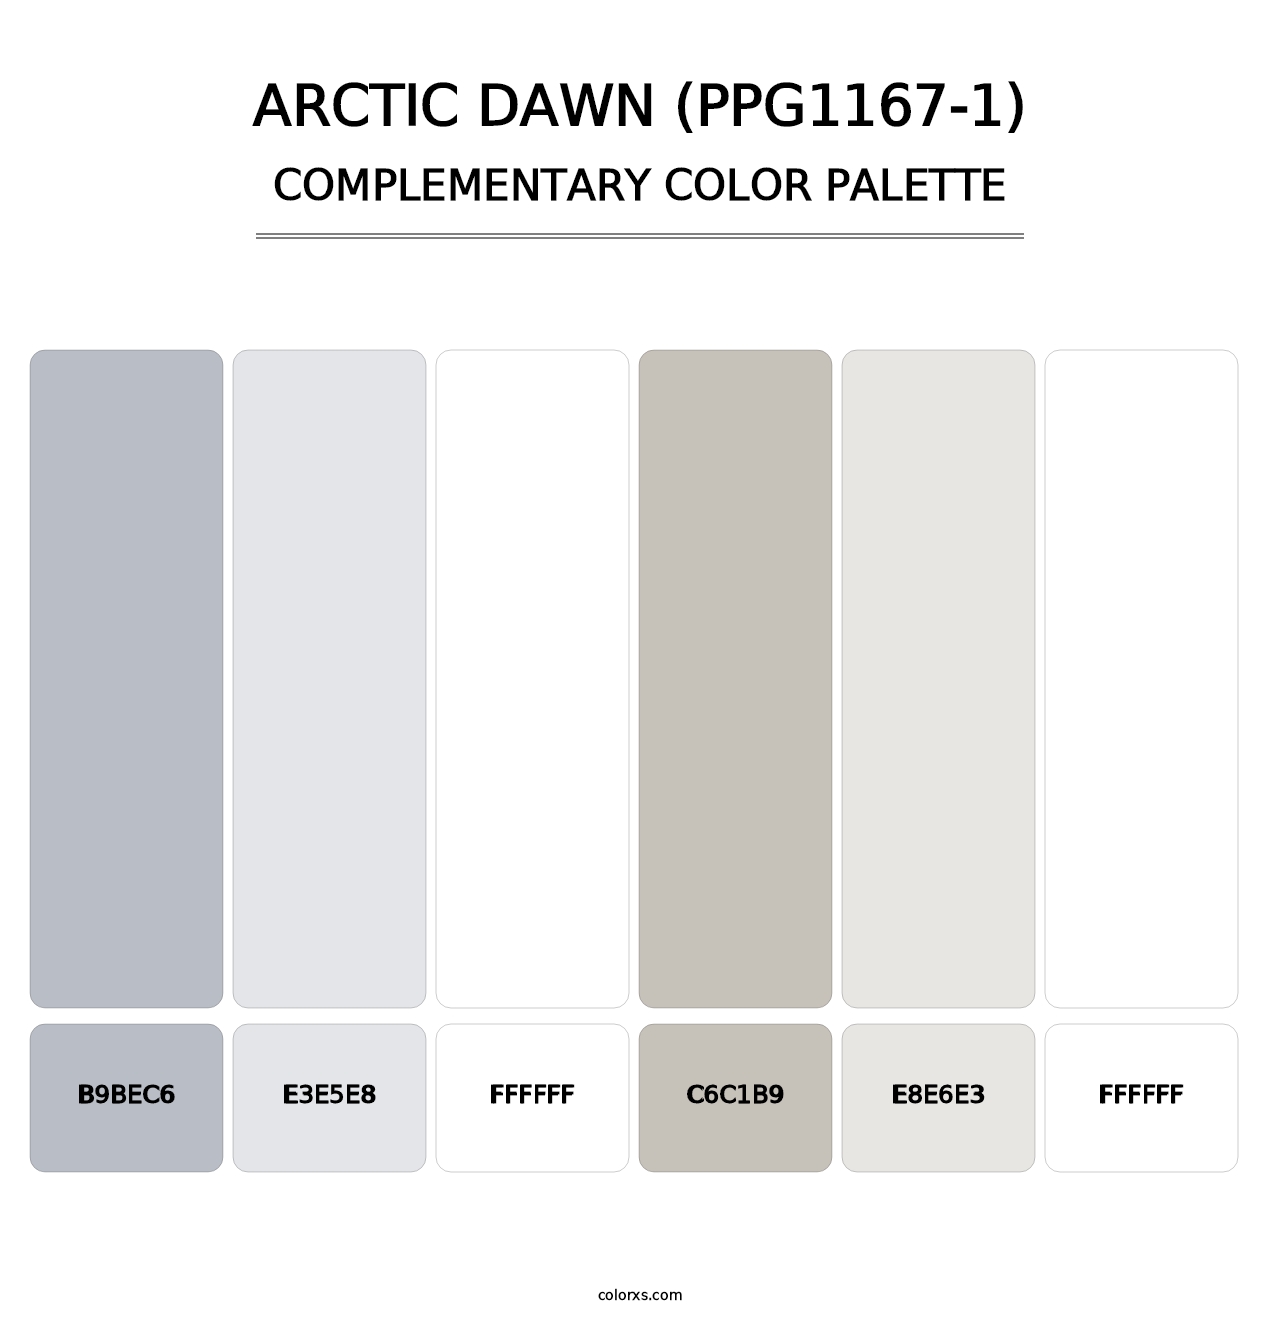 Arctic Dawn (PPG1167-1) - Complementary Color Palette